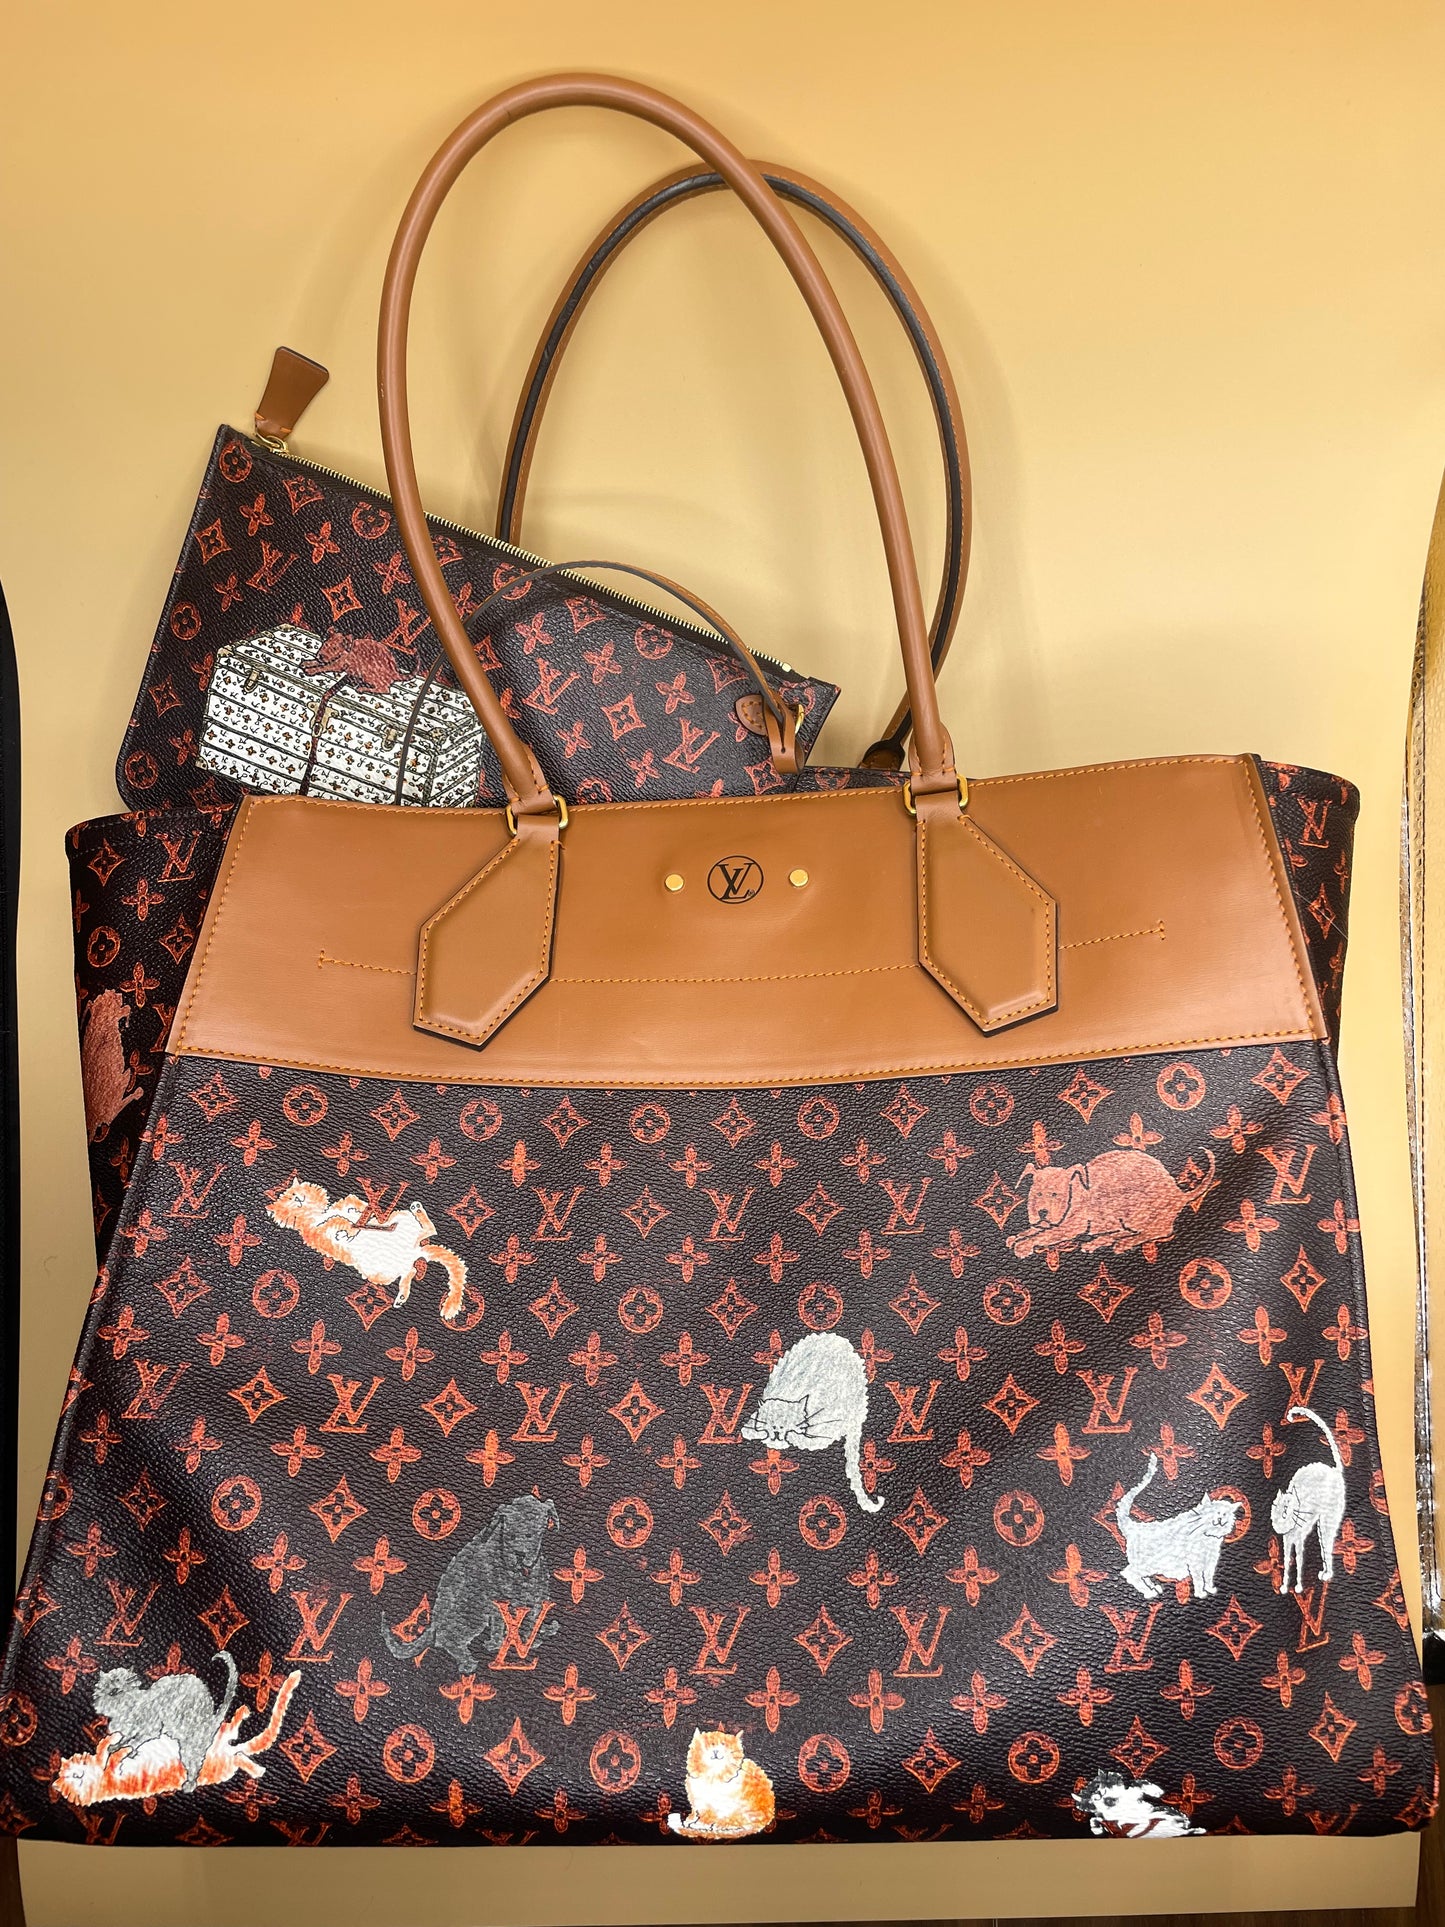 LV UNBOXING - NEW LIMITED BAG! 